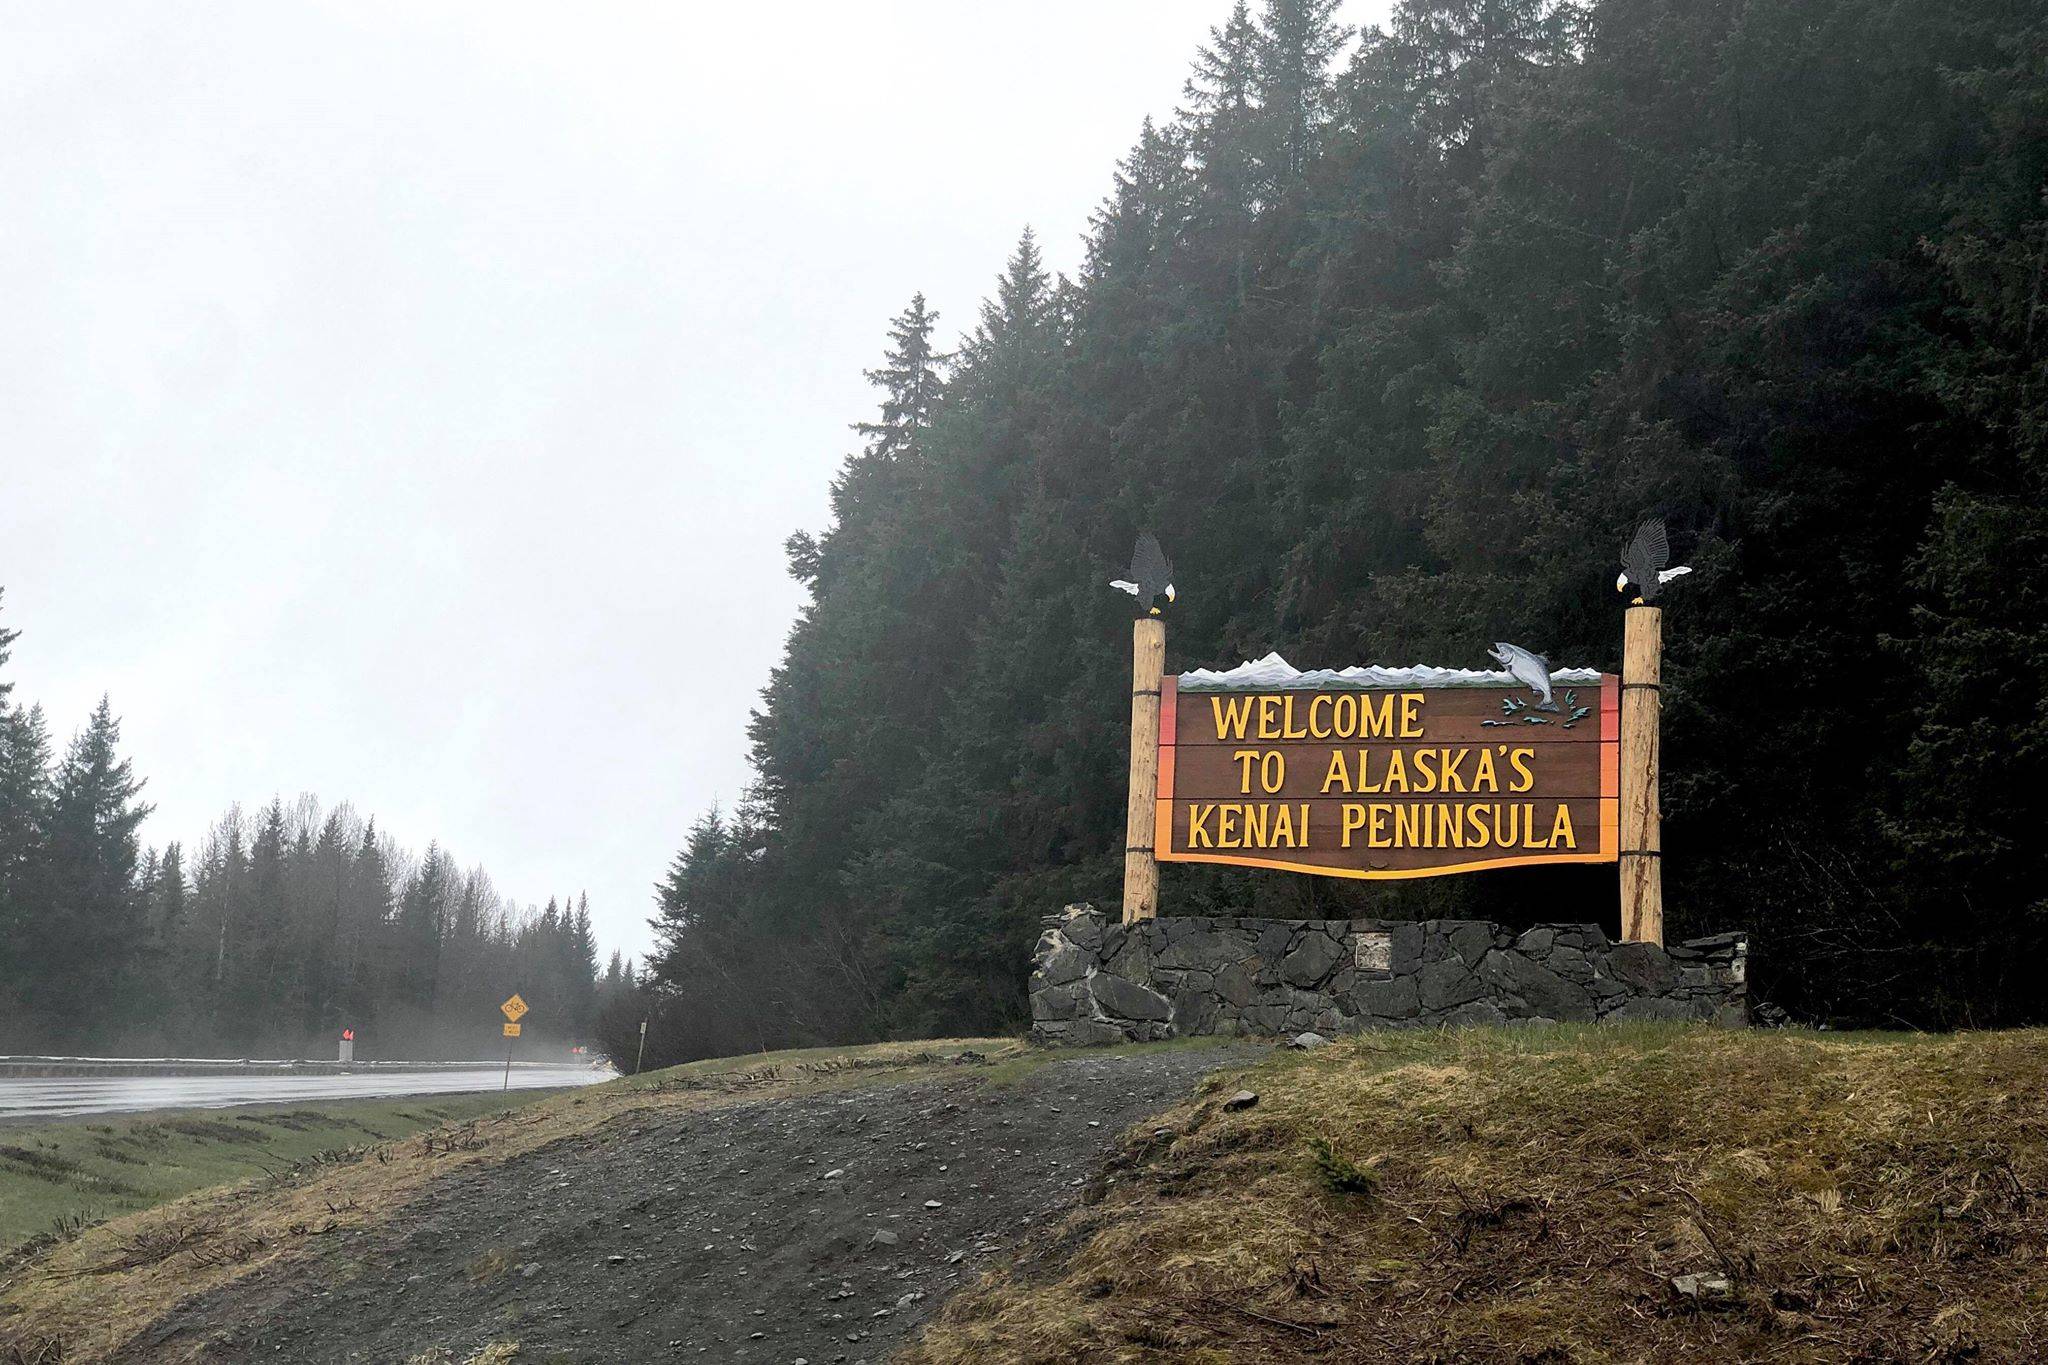 The borough’s welcome sign is back on the road and ready to greet drivers as they enter the Kenai Peninsula on Milepost 75 of the Seward Highway, on Sunday, May 5, 2019, near Turnagain Pass, Alaska. (Photo by Victoria Petersen/Peninsula Clarion)